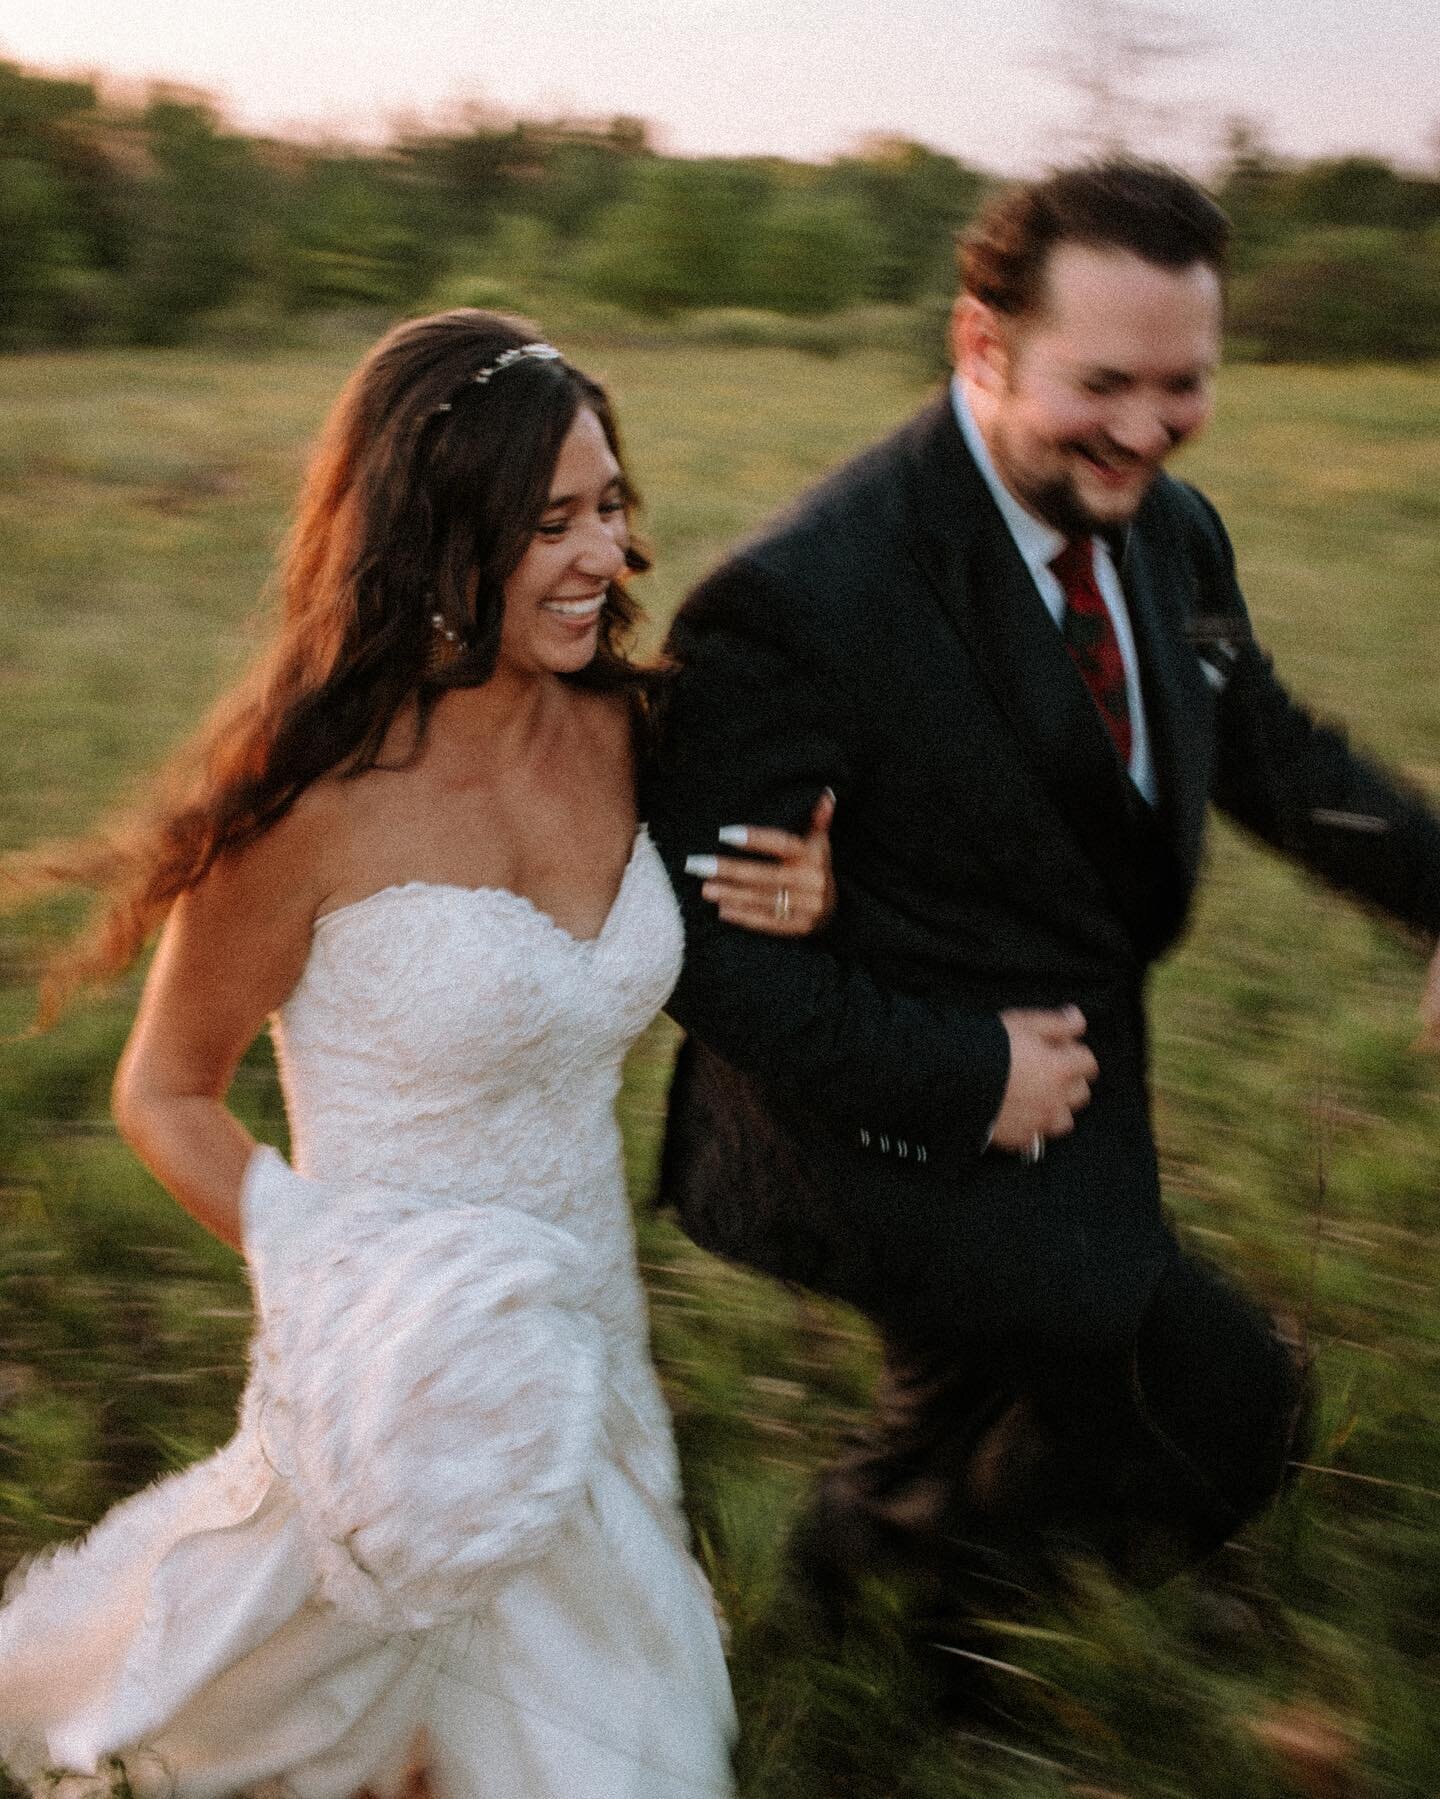 May you dash into the new year as blissfully as these two did on their wedding day 🤍

Wishing you gratitude for years past, joy in the present, and hope for the future 🕊️